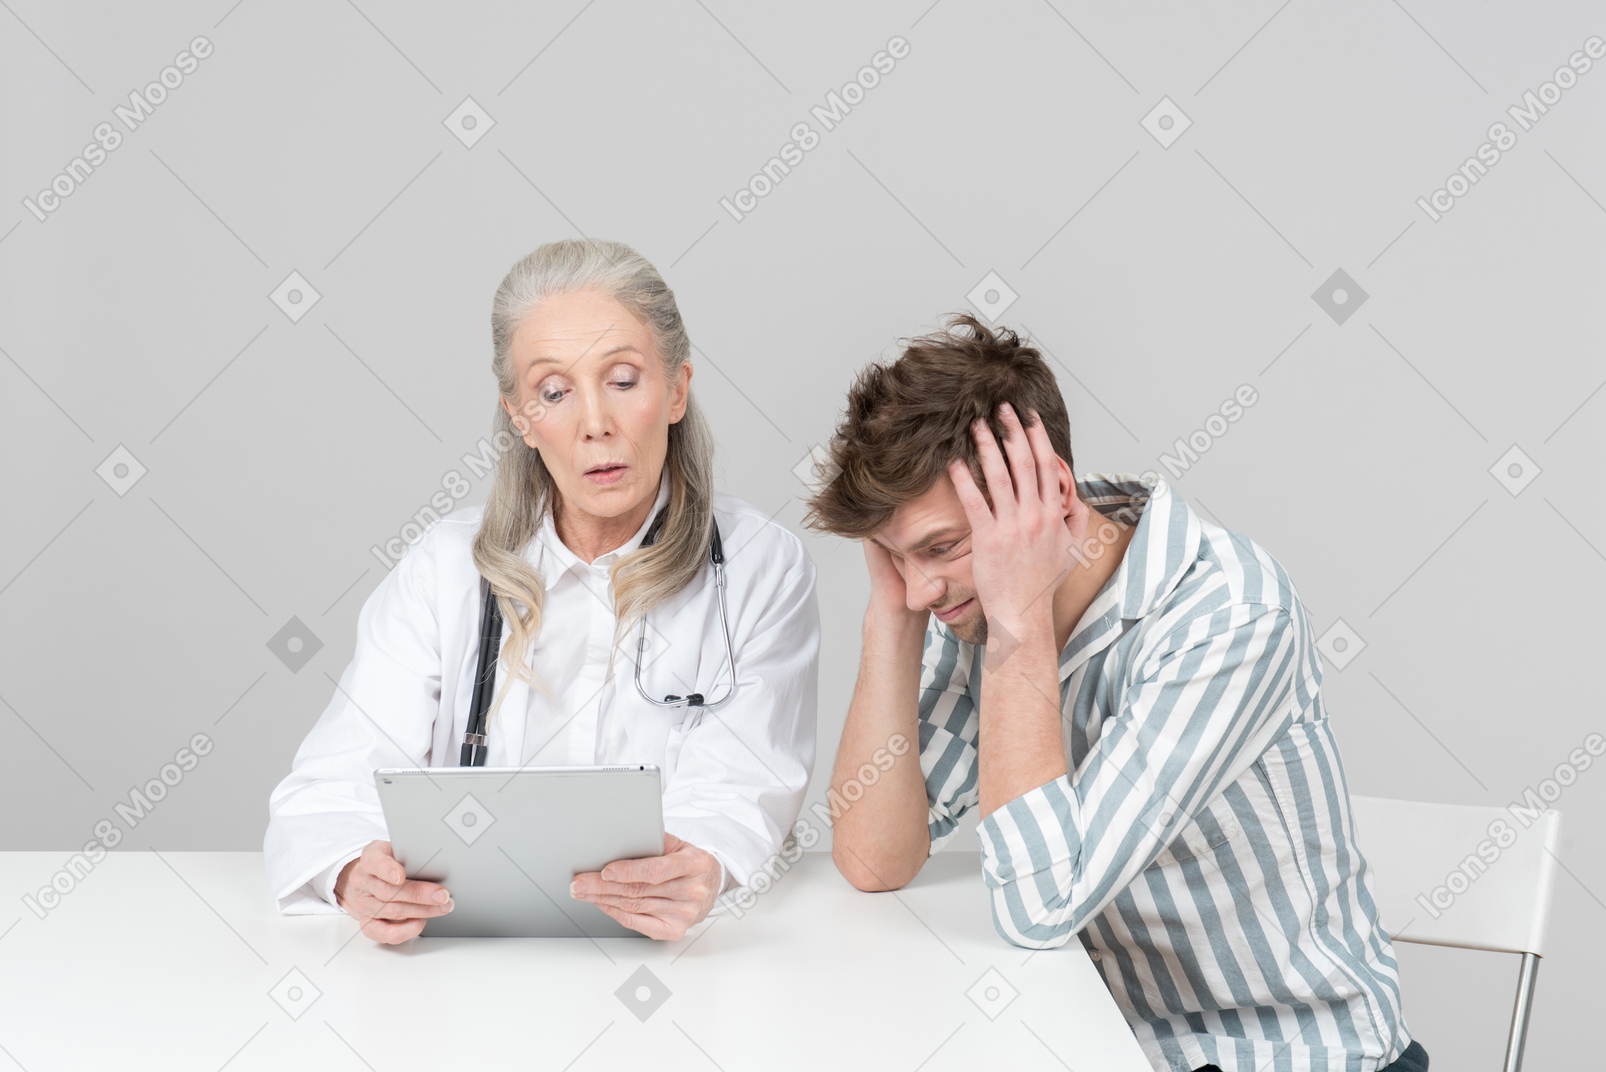 Aged female doctor showing something on her digital tablet to a patient